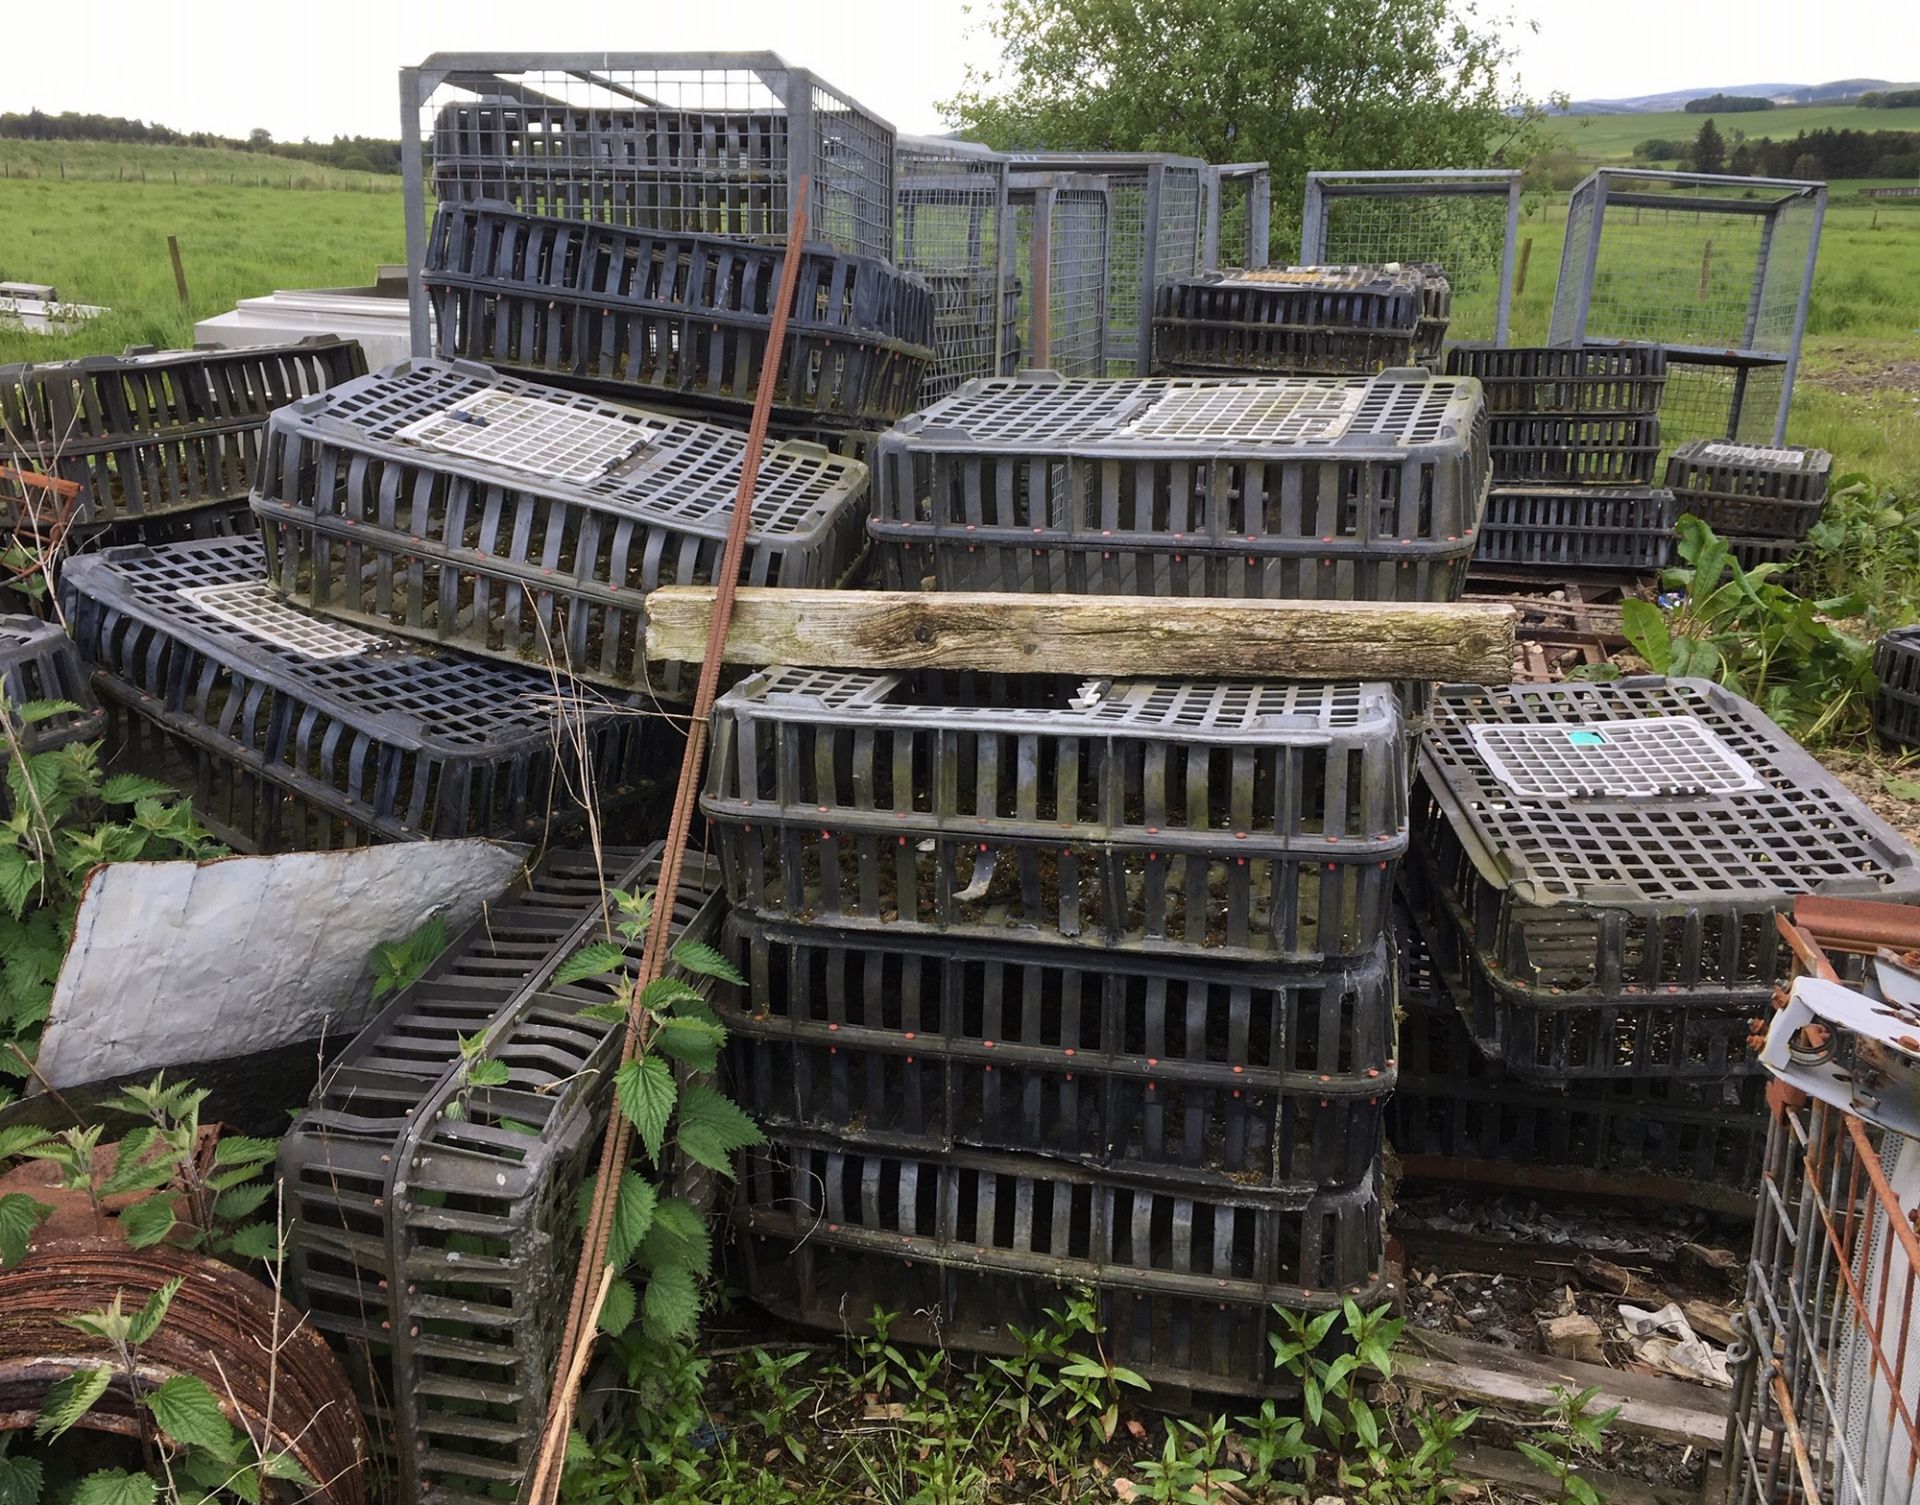 Lot of approx 50 Chicken Carrying Baskets approx 38" x 24" x 12".